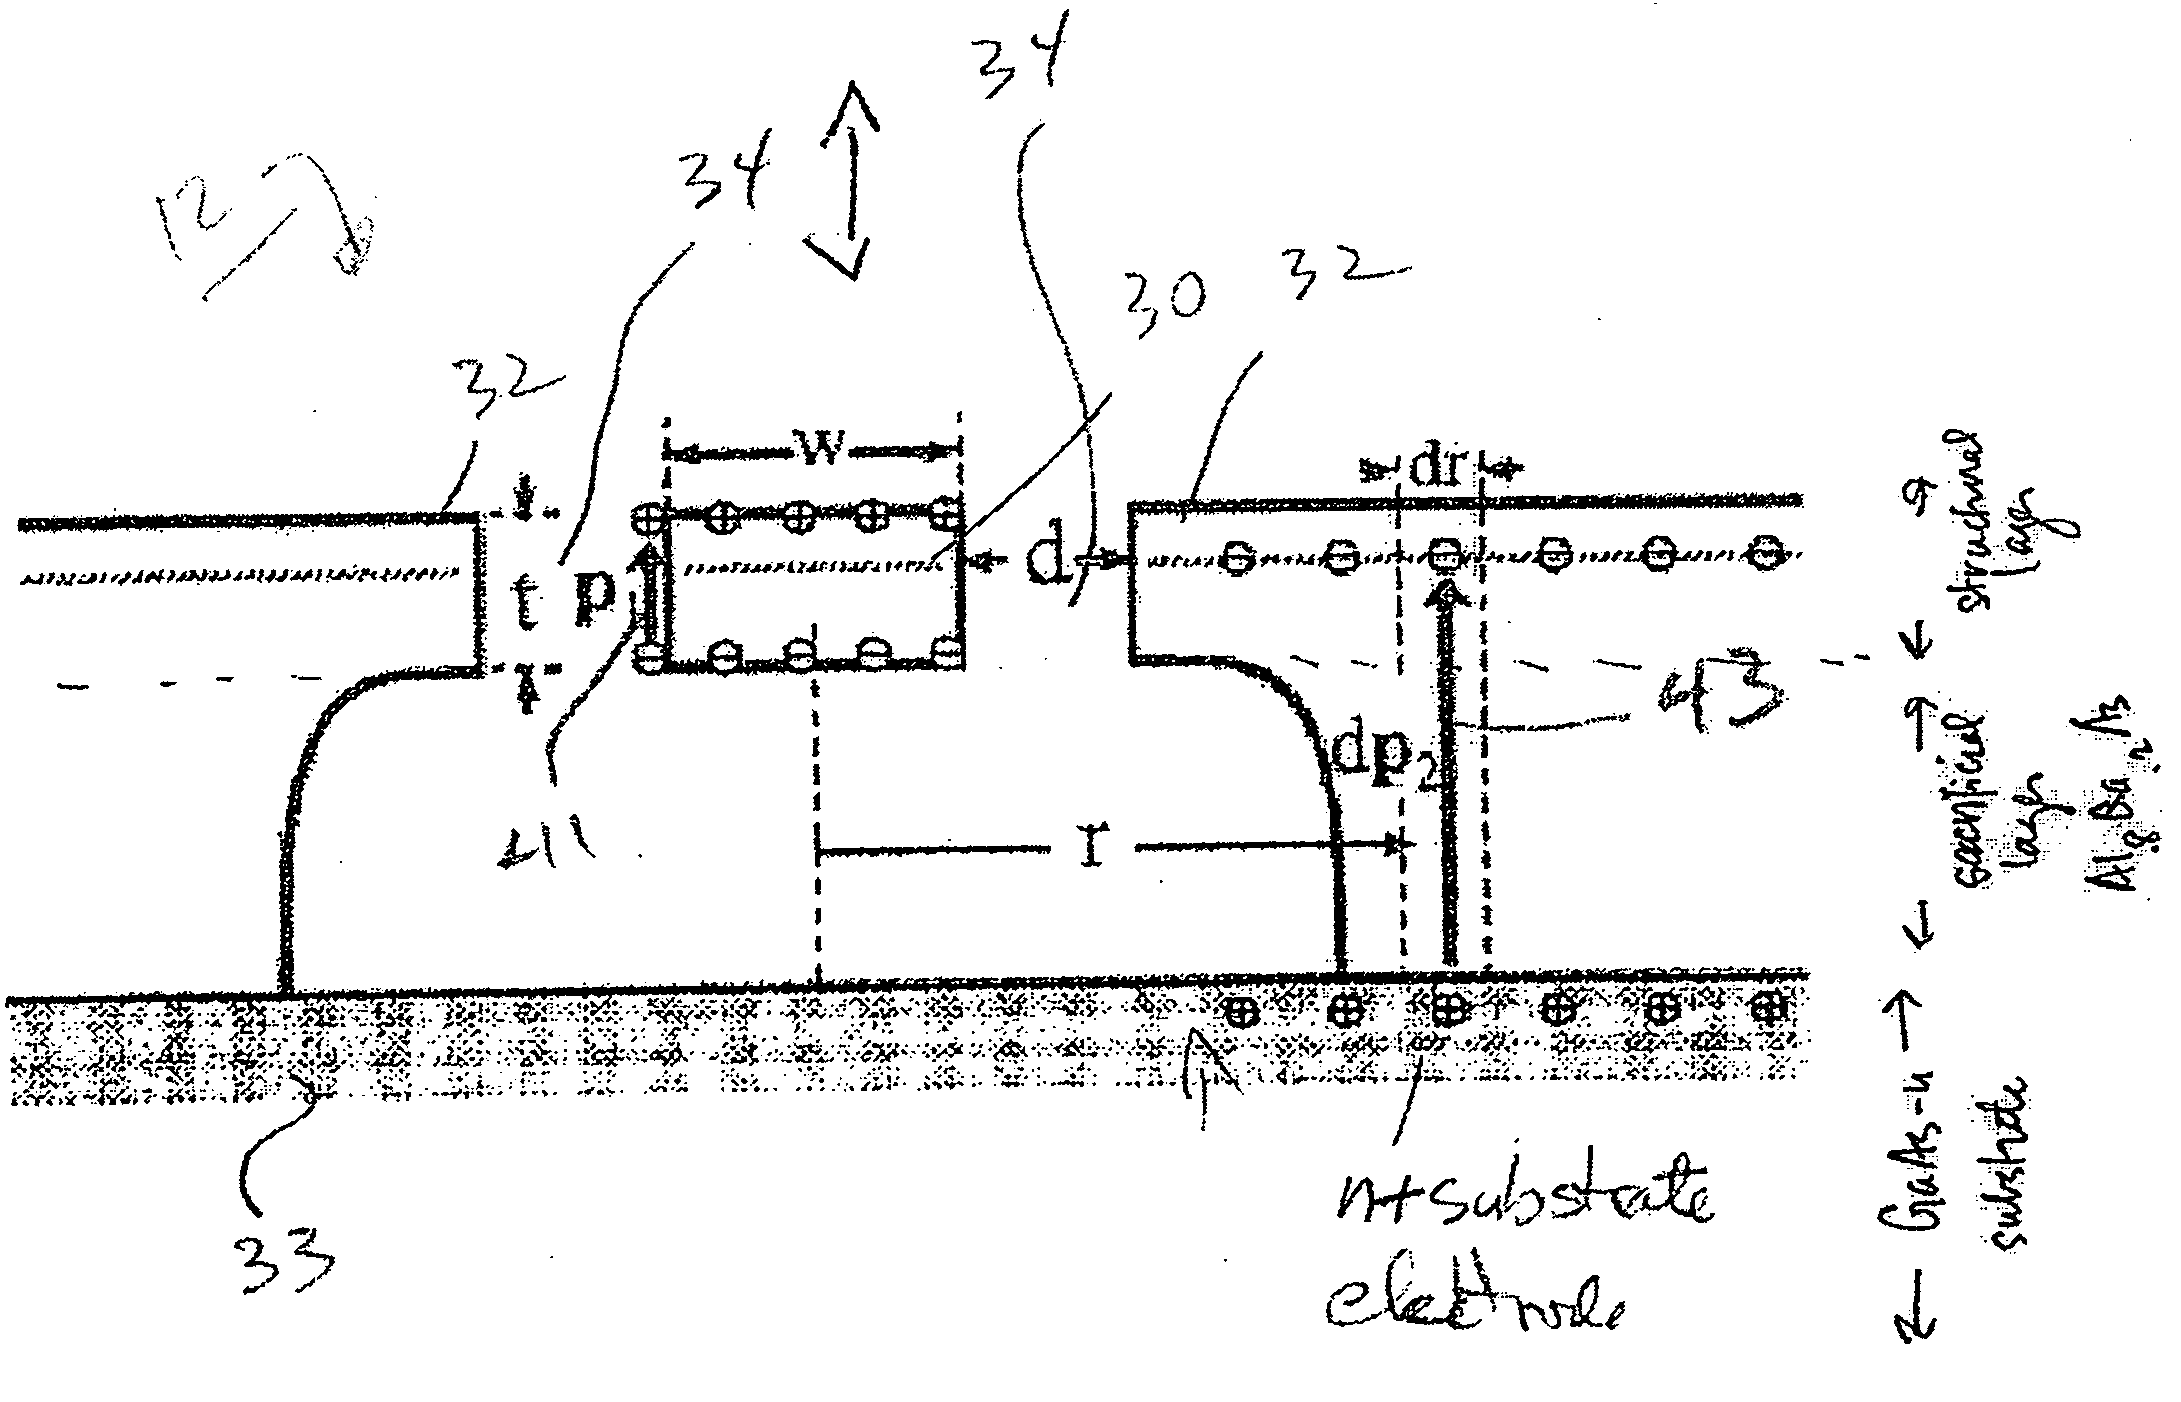 Apparatus and method for vacuum-based nanomechanical energy force and mass sensors